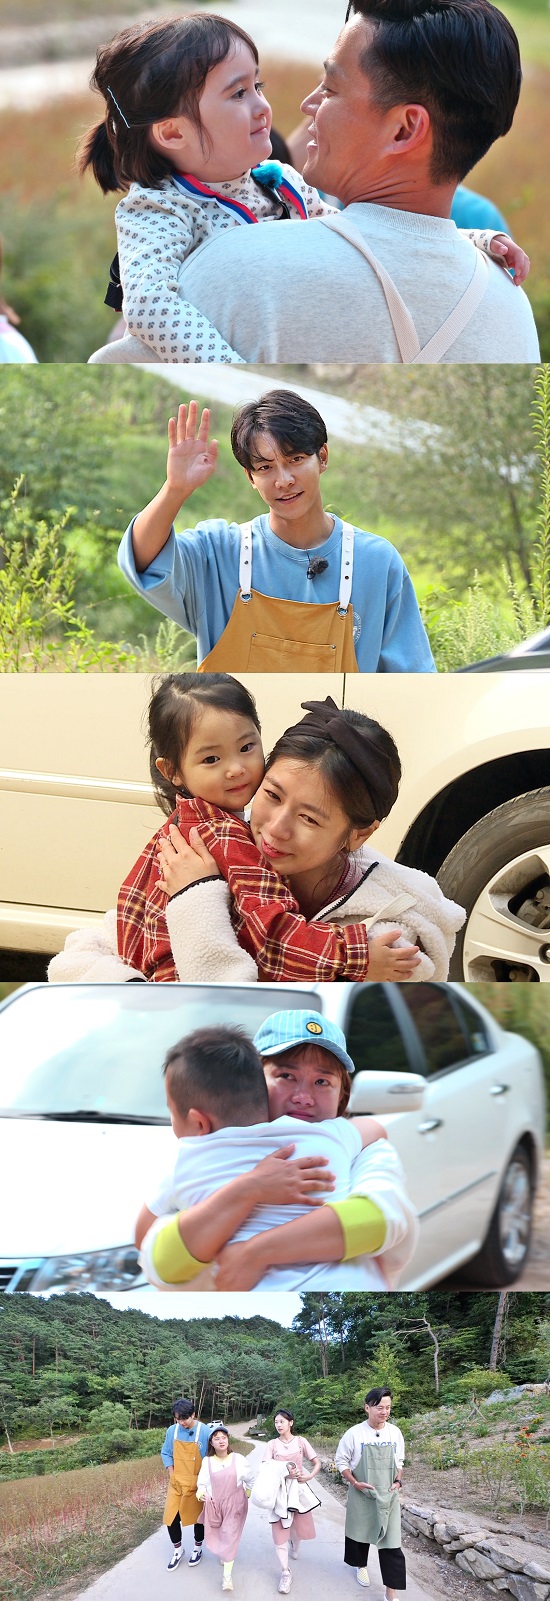 The last story of Little Forest members and Little Lees unfolds.In the final episode of SBS Monday Entertainment Little Forest broadcasted on the 7th, Lee Seo-jin, Lee Seung-gi, Park Na-rae, Jung So-min, four members and Little will be released.Little Forest has attracted a lot of attention with its extraordinary formation called the first terrestrial entertainment and its colorful lineup of Lee Seo-jin, Lee Seung-gi, Park Na-rae and Jung So-min.On this day, Little Forest marks the end of the 16-part long-term.Recently, the members shared their last greetings with the little ones they had chosen.Jung So-min poured tears into Brookes words, I will be Little Forest aunt when I grow up, and Park Na-rae, who had been tearing until the end, also saw tears of regret last.Lee Seung-gi, who tried to pretend to be cool, also caught the eye with agitated appearance.Finally, I have never seen tears in any broadcast in the meantime, said Lee Seo-jin, a Confessions Sosse Wit Nam, who also surprised everyone.Lee Seo-jin, who made his debut in the 21st year, is interested in why he was the first to cry.The final episode of Little Forest will be broadcast at 10 pm on the 7th.Photo: SBS